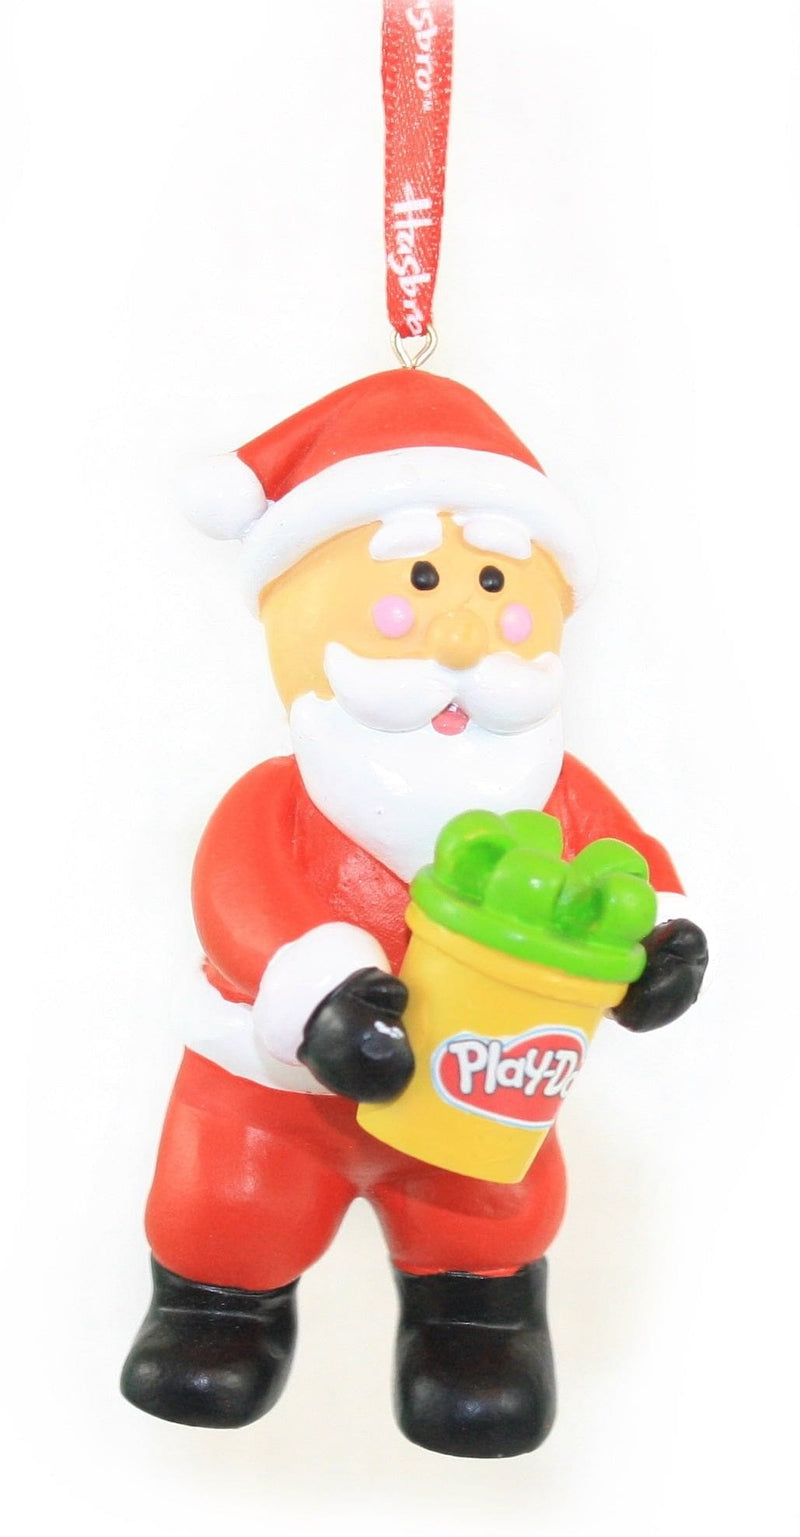 Hasbro Play Doh Ornament - Shelburne Country Store